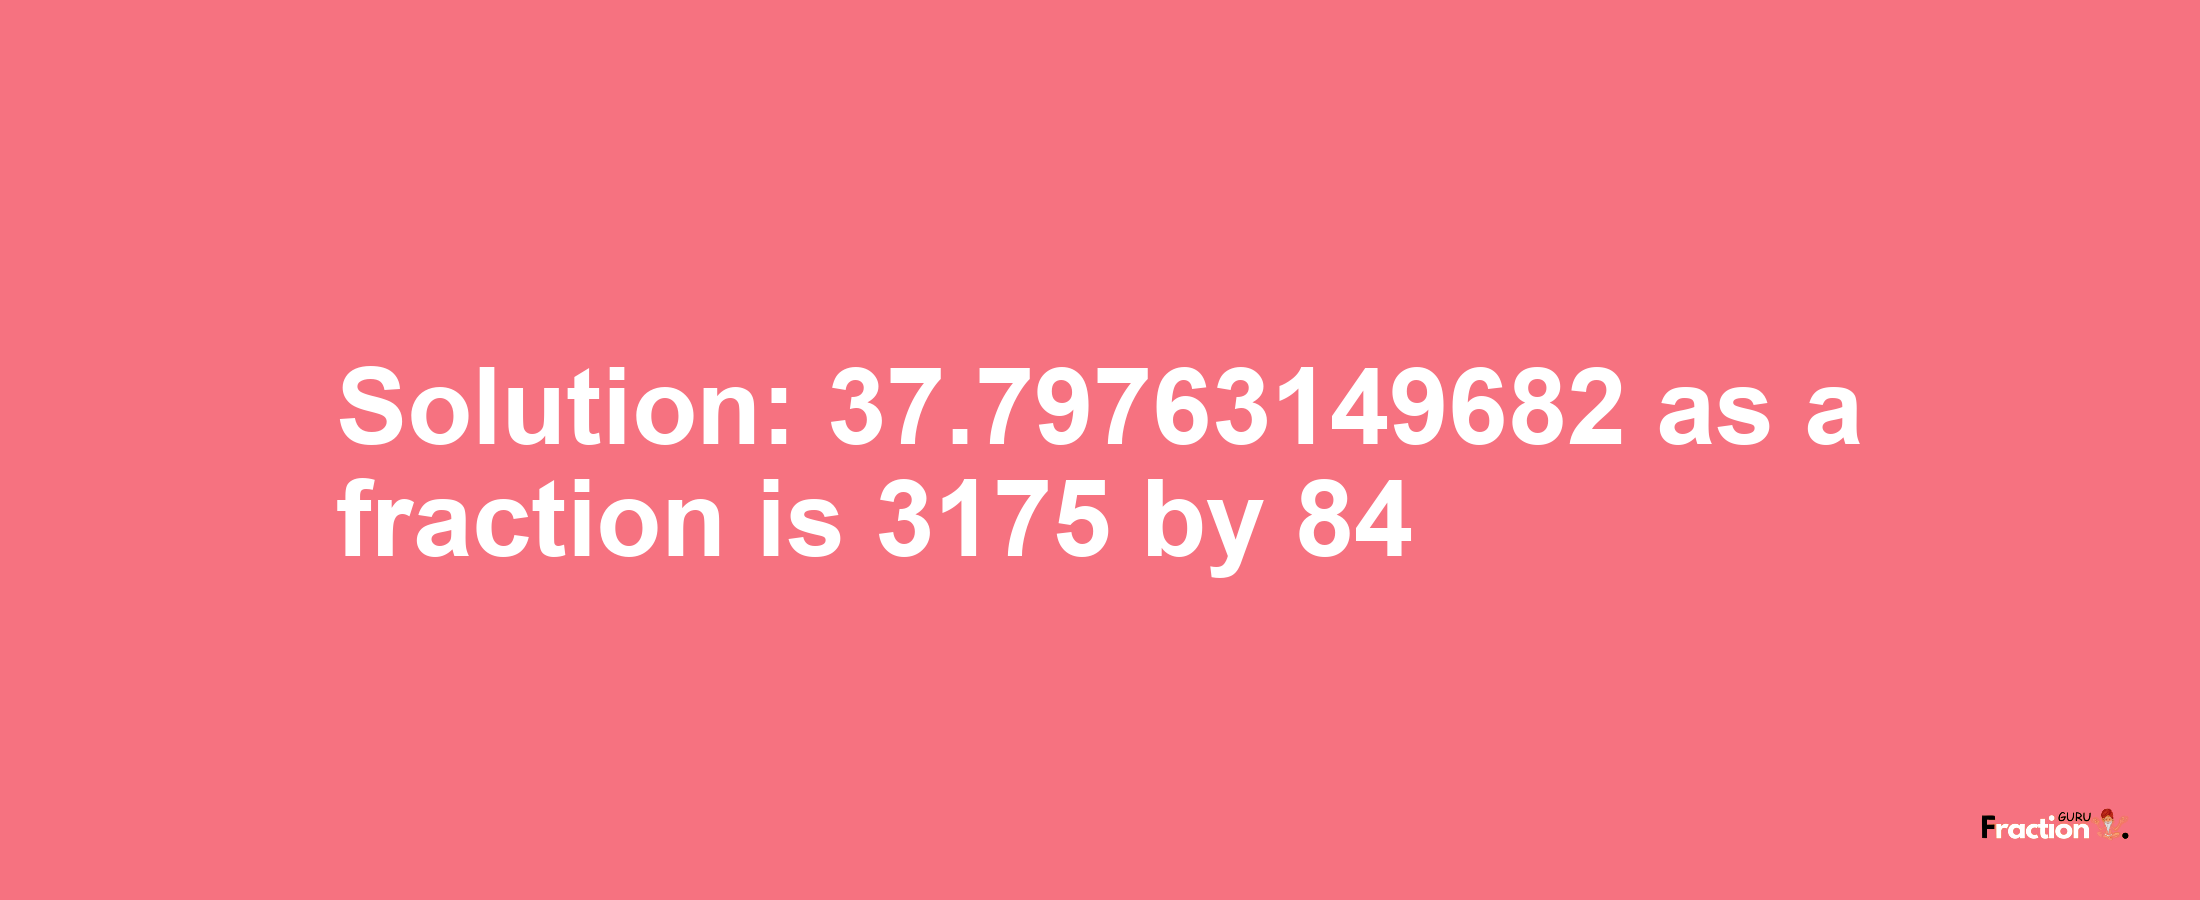 Solution:37.79763149682 as a fraction is 3175/84